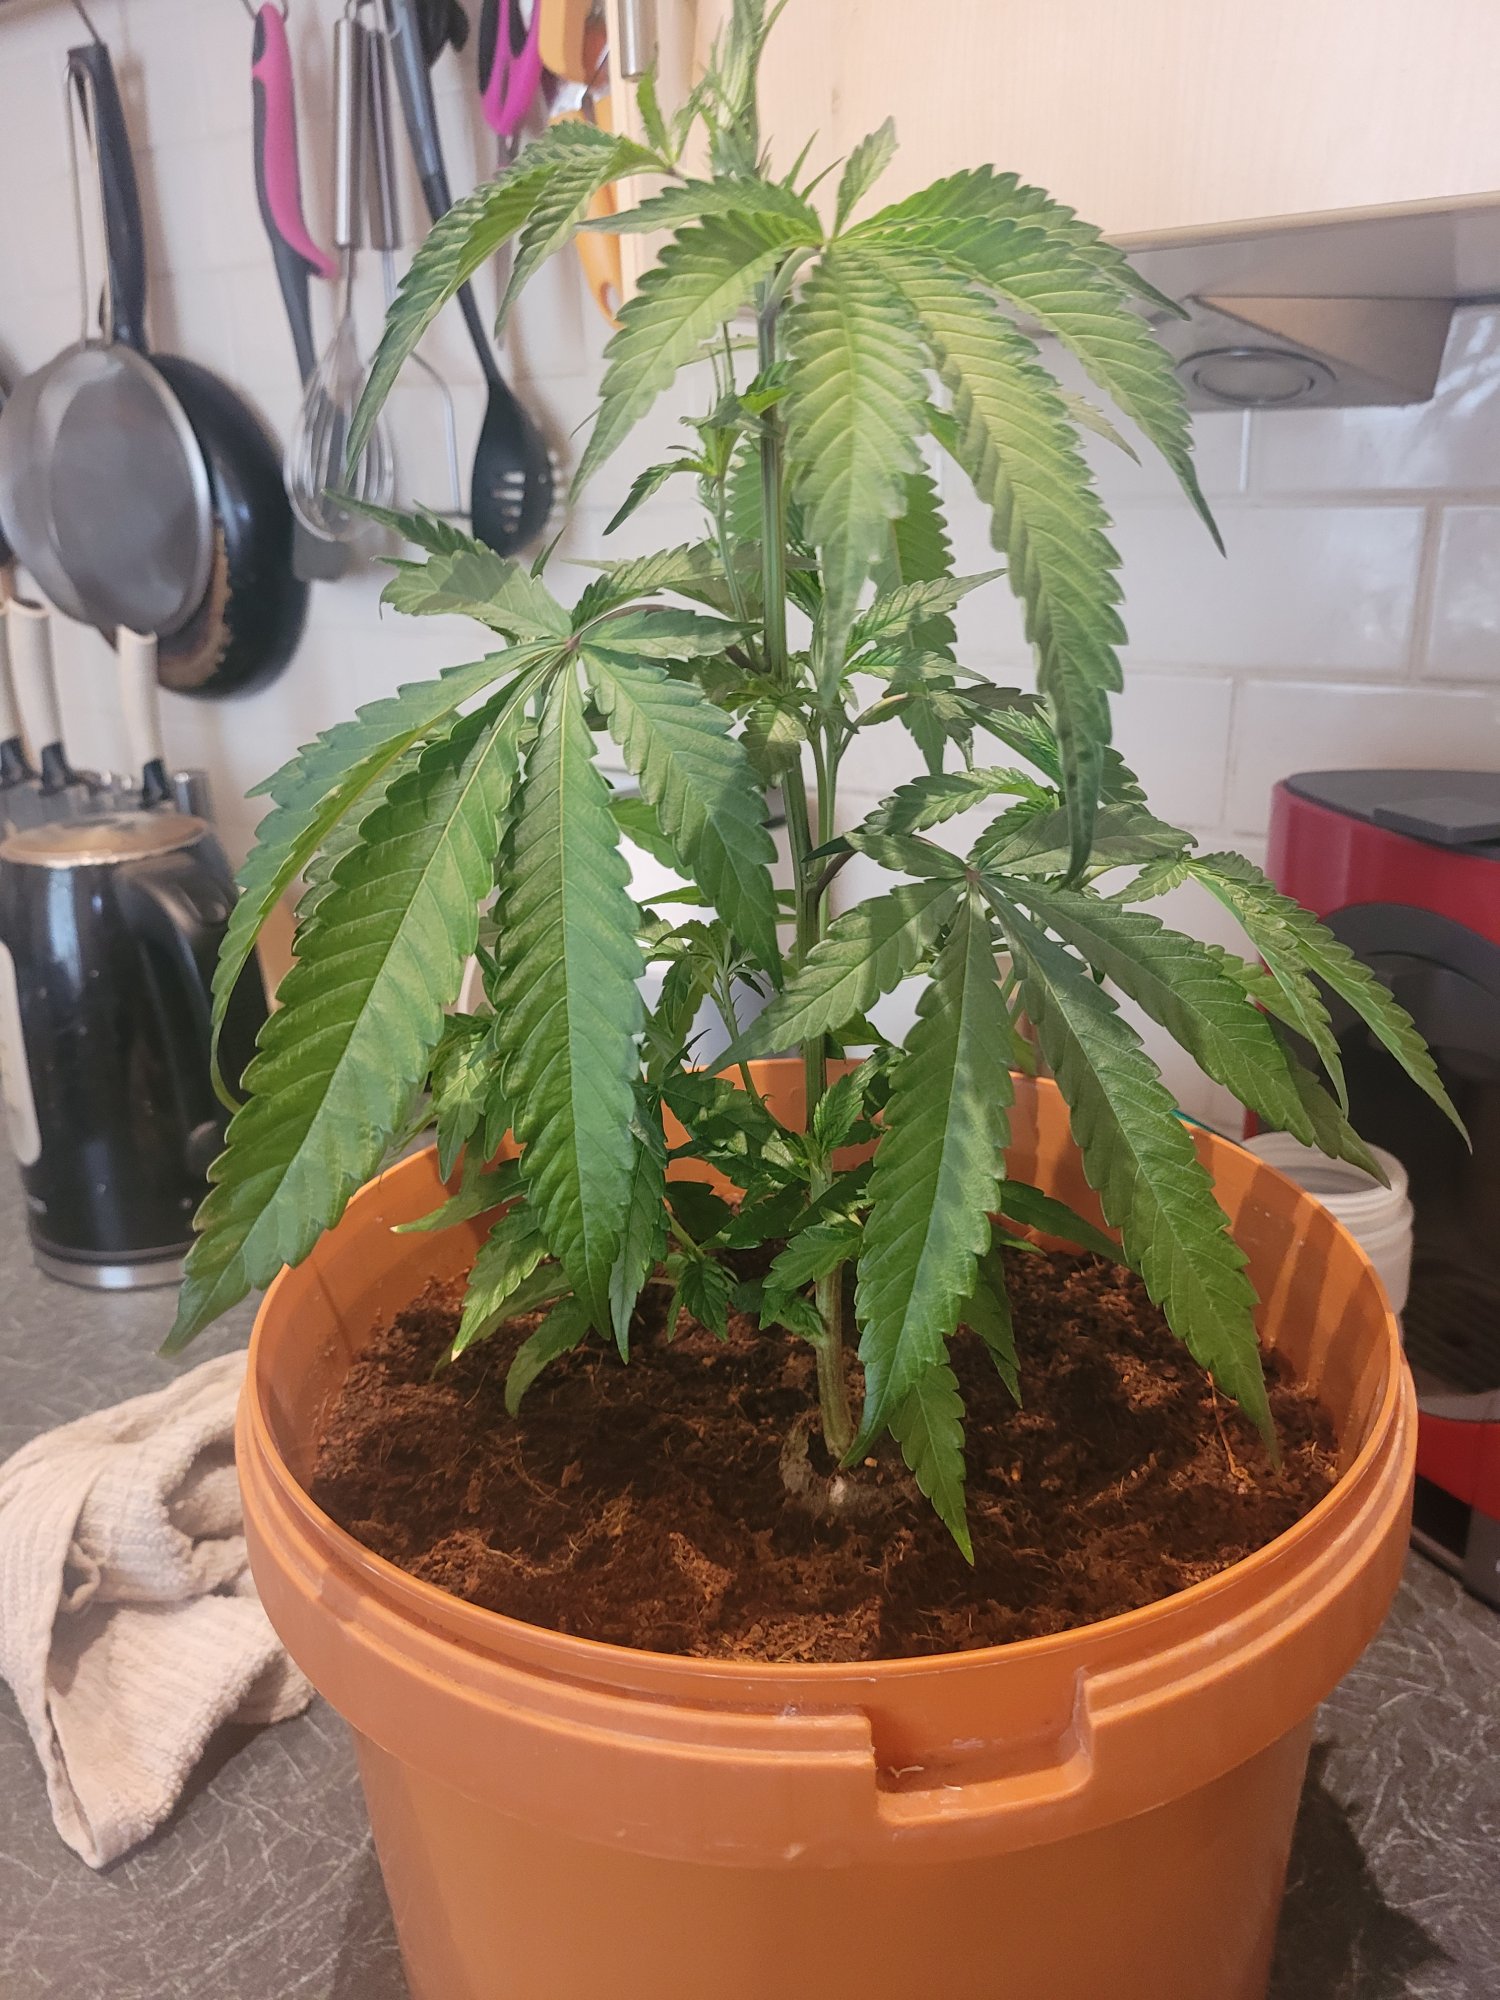 Advice needed on topping please